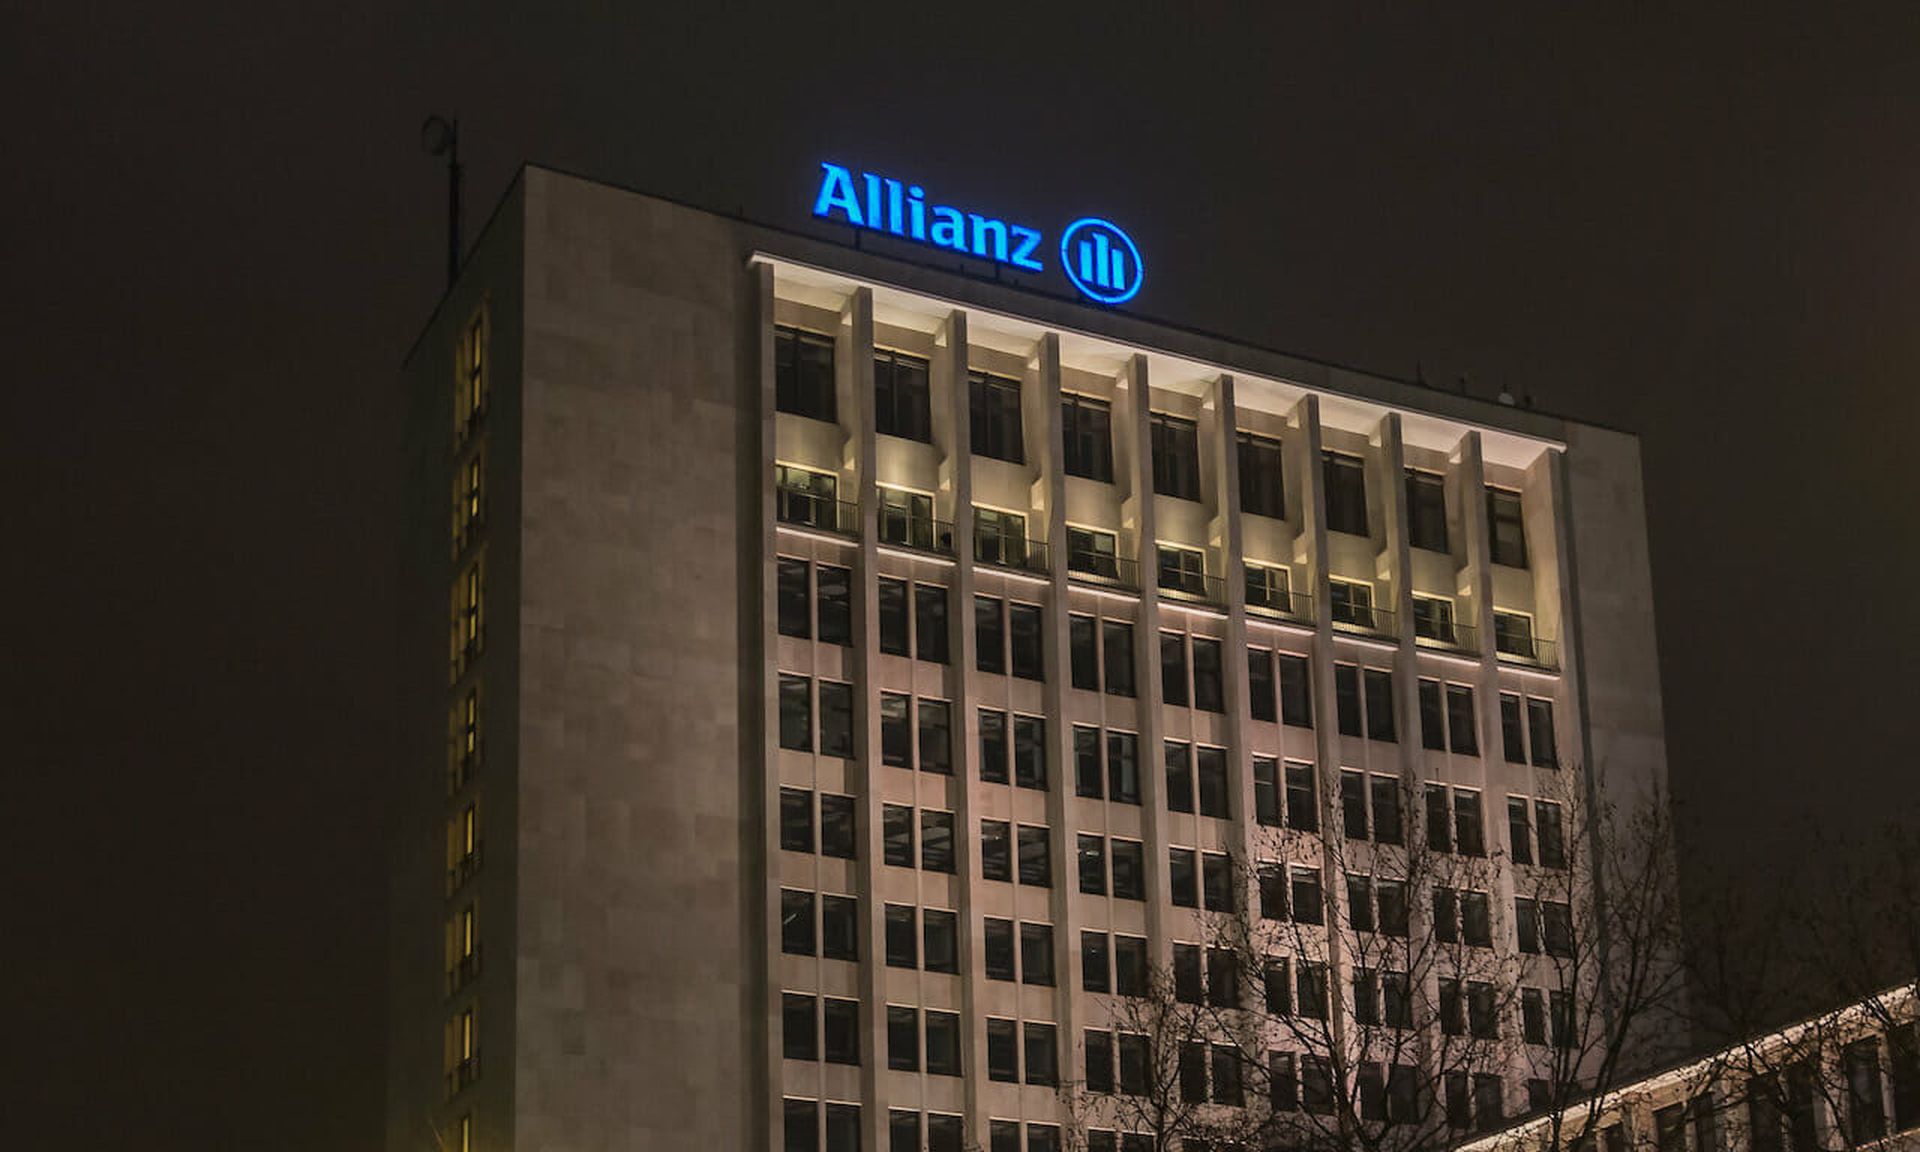 Allianz Insurance has been a leader in fostering a DevSecOps culture. Today’s columnist, Matias Madou of Secure Code Warrior, offers advice on how to bring the AppSec and DevOps teams together to create a collaborative DevSecOps approach.